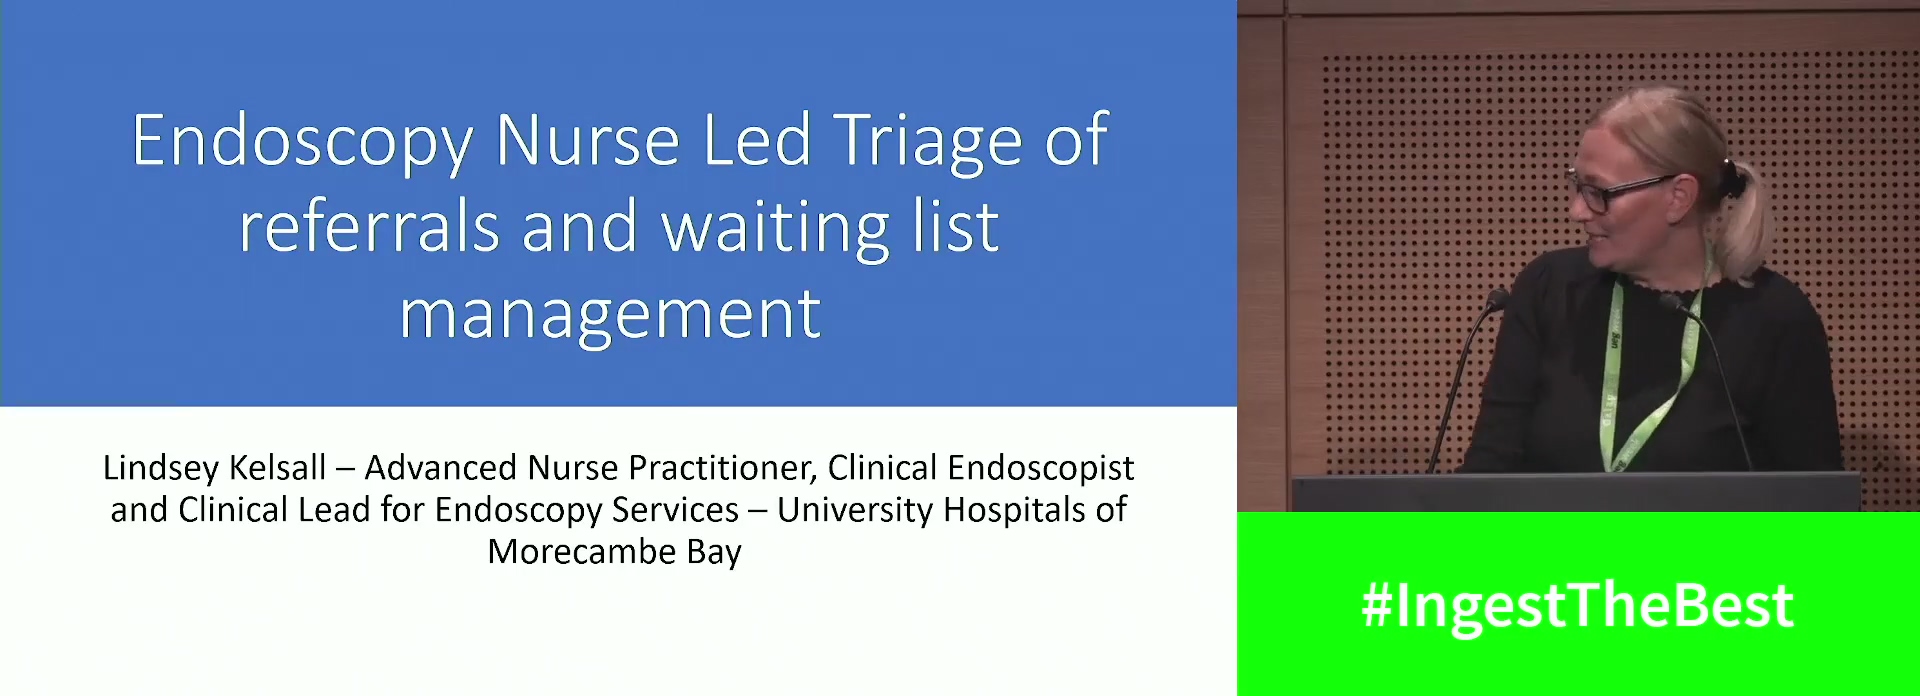 Endoscopy nurse led triage of referrals and waiting list management